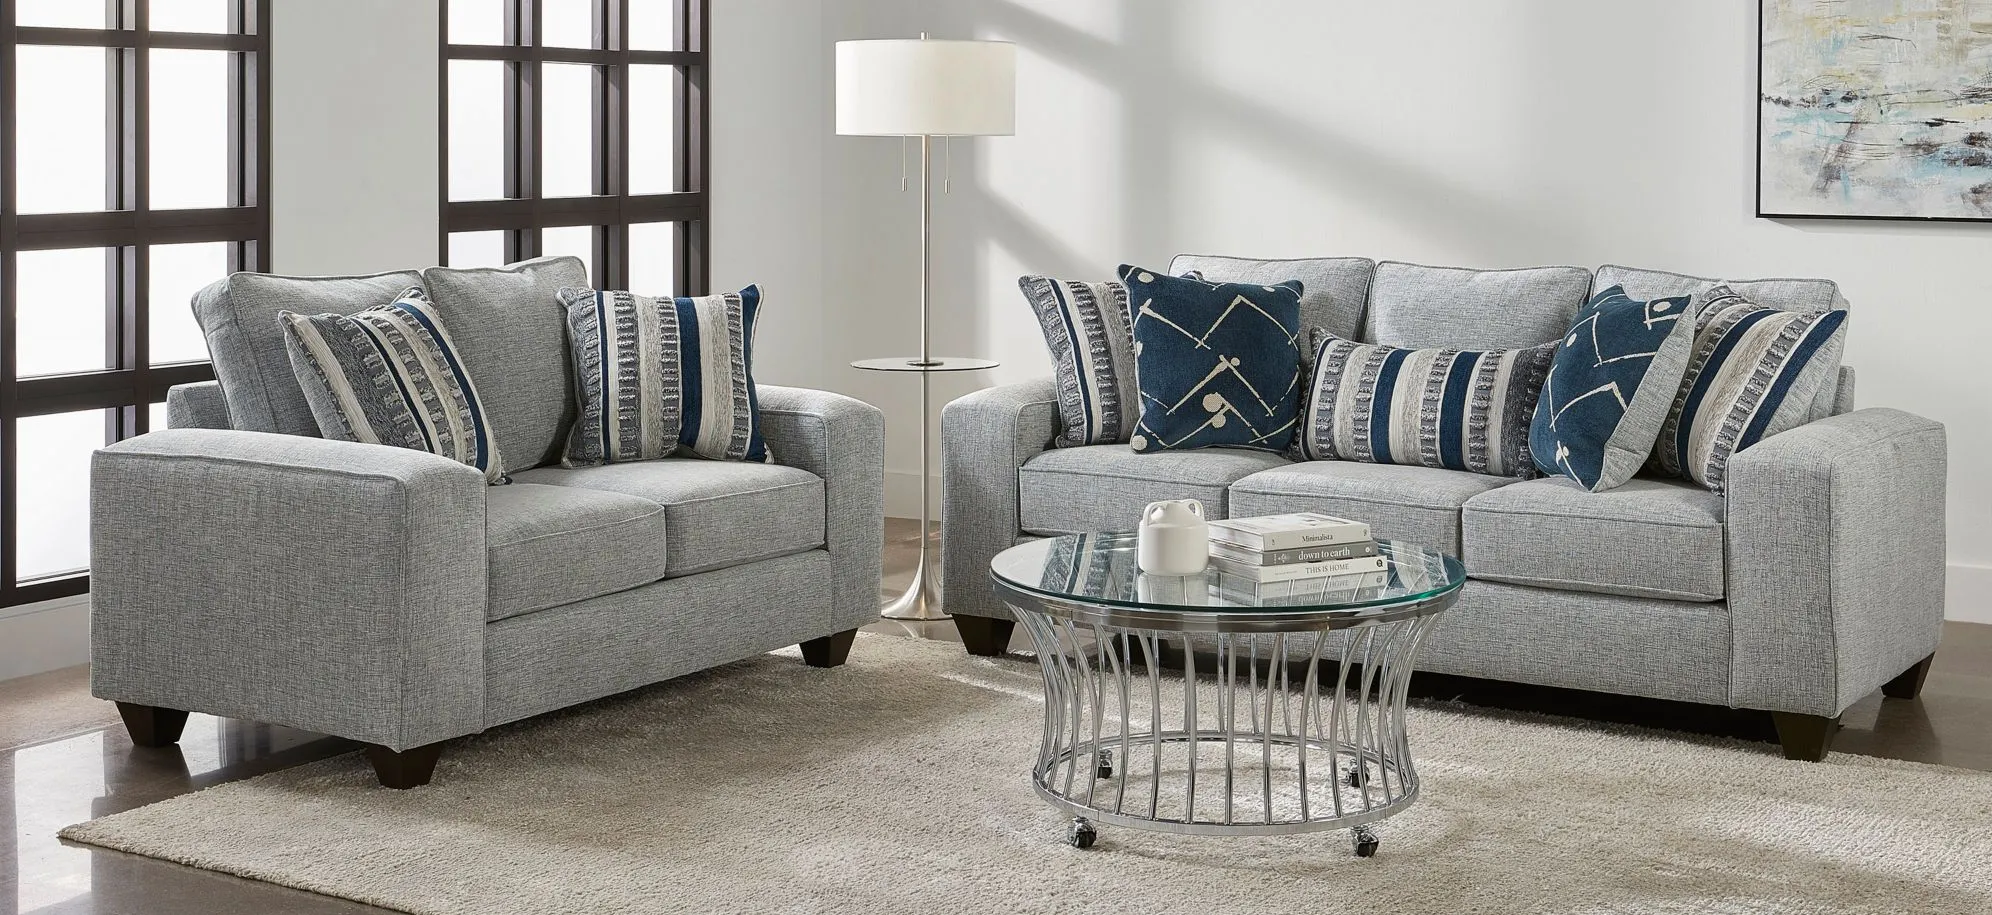 Alston Chenille 2-pc. Sofa and Loveseat Set in Blue by Albany Furniture